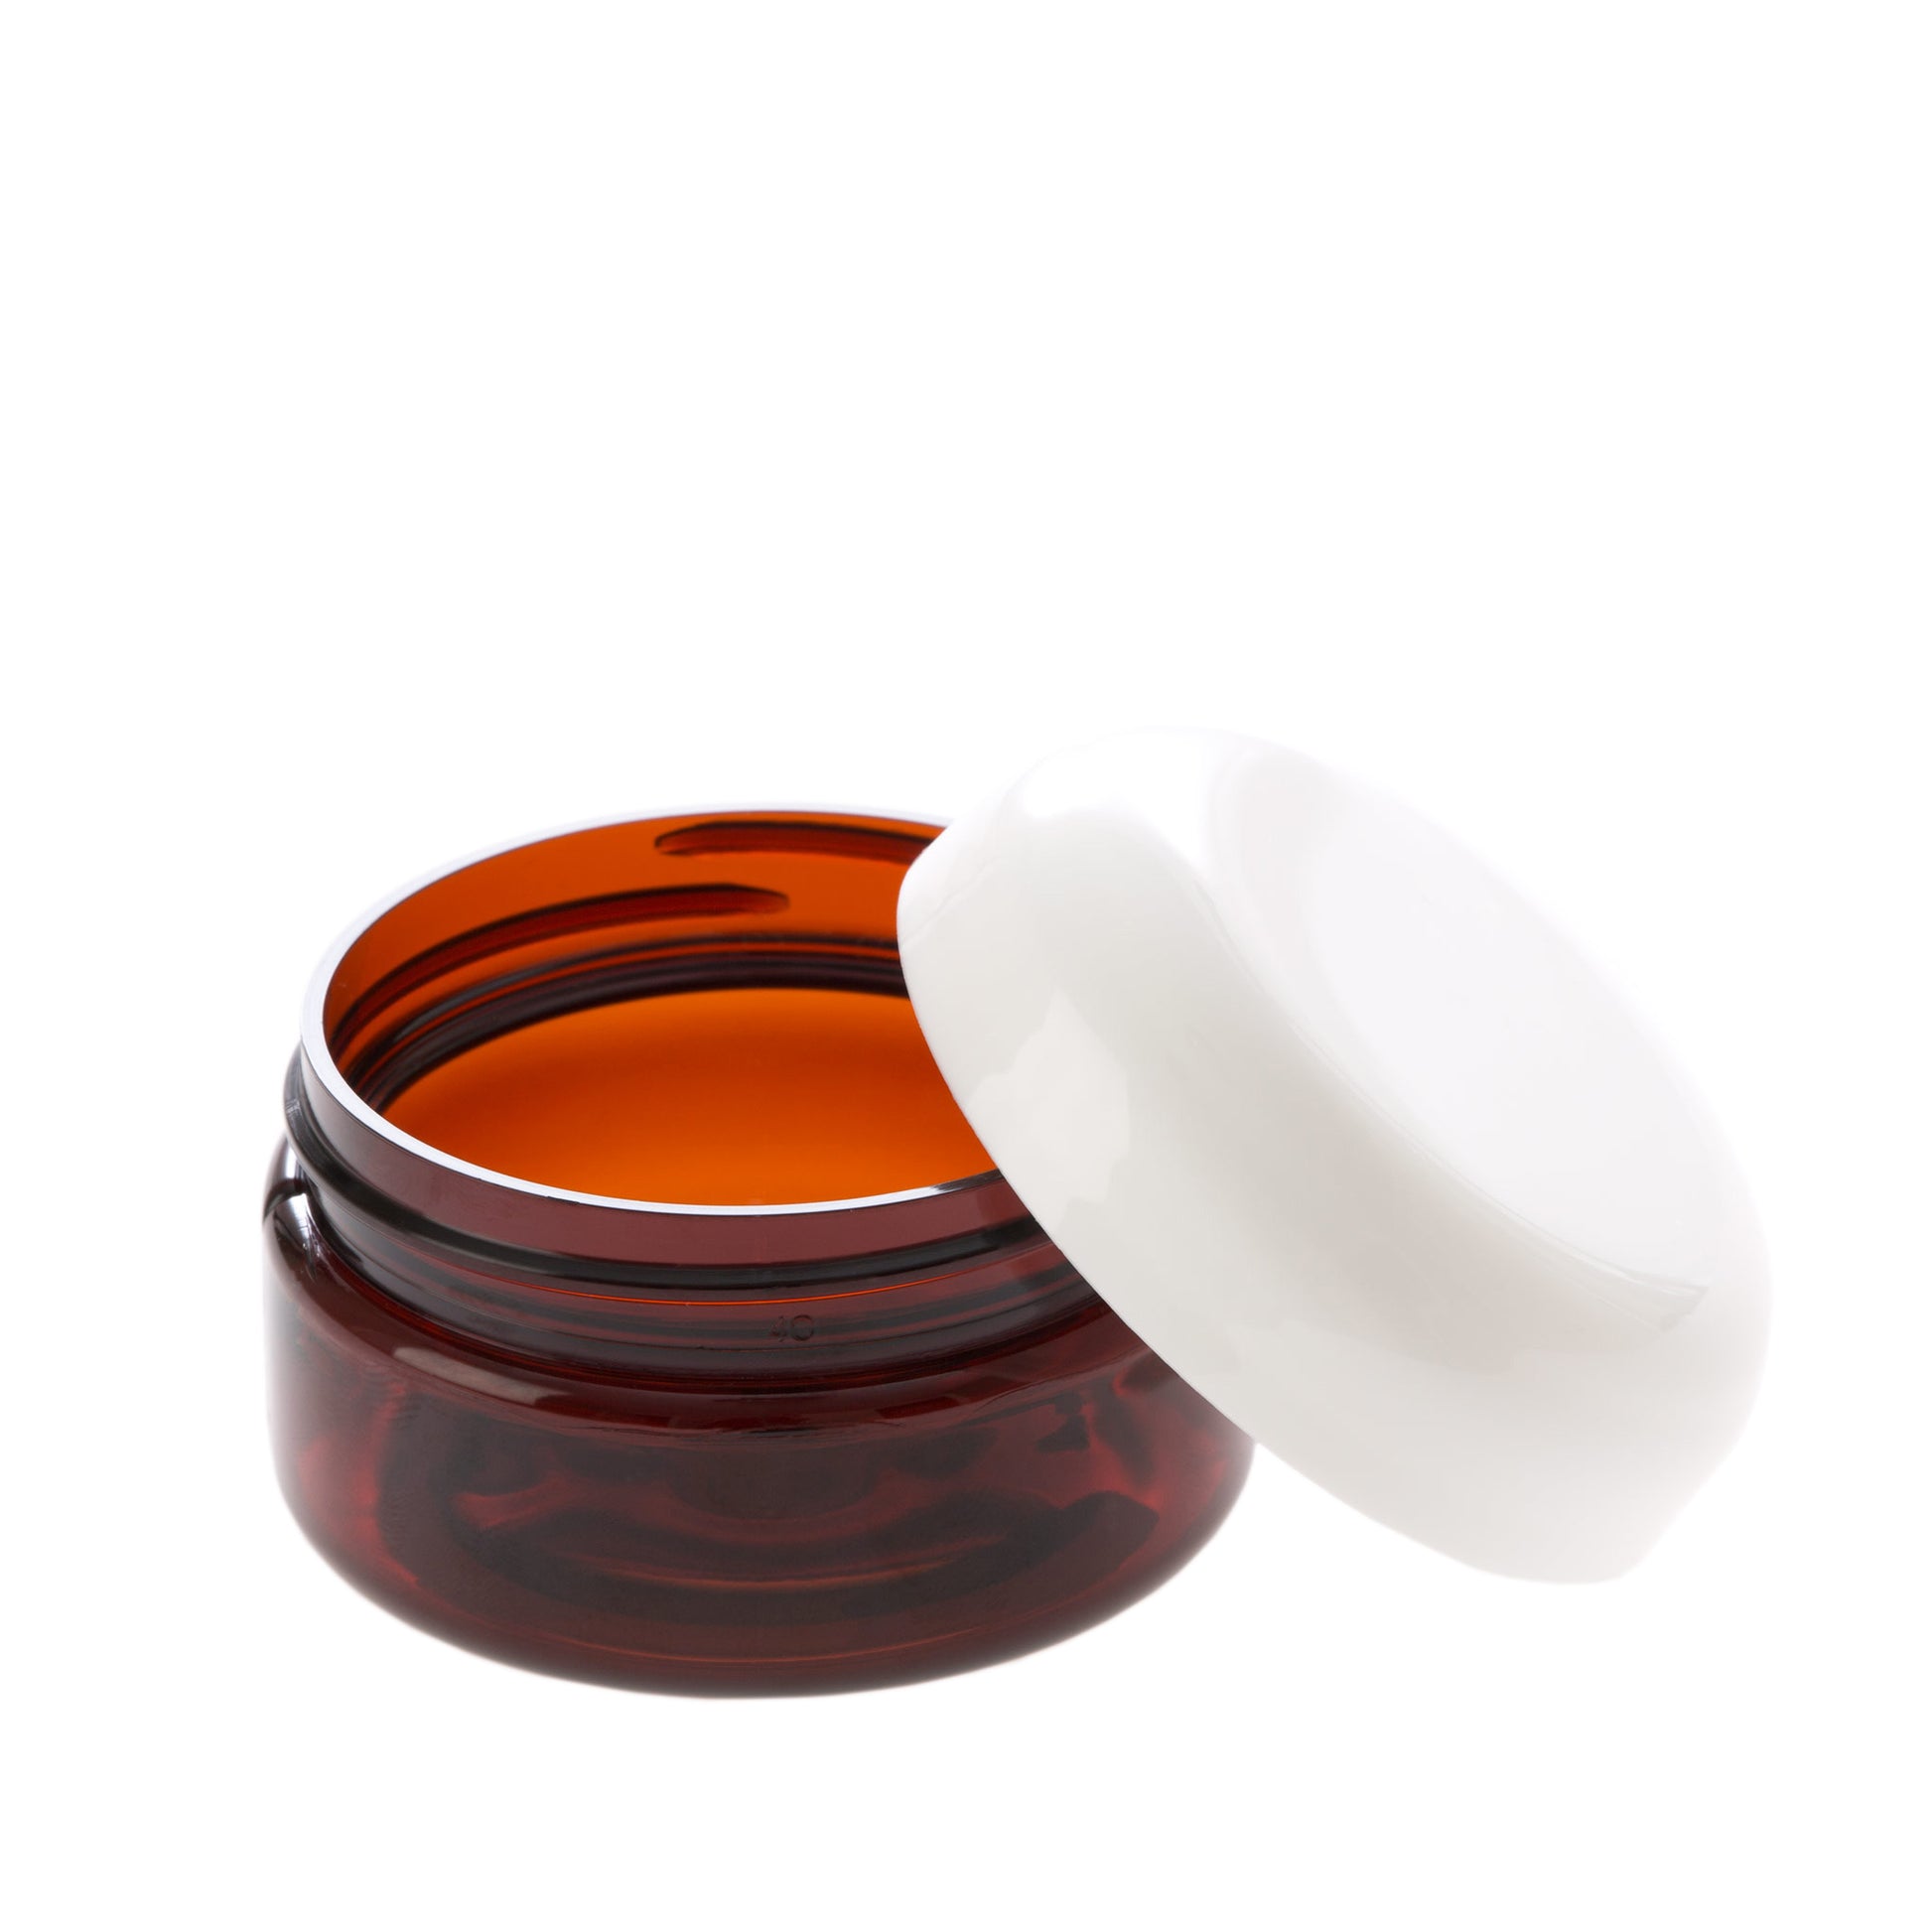 2 oz Amber Shallow Jar with White Dome Cap